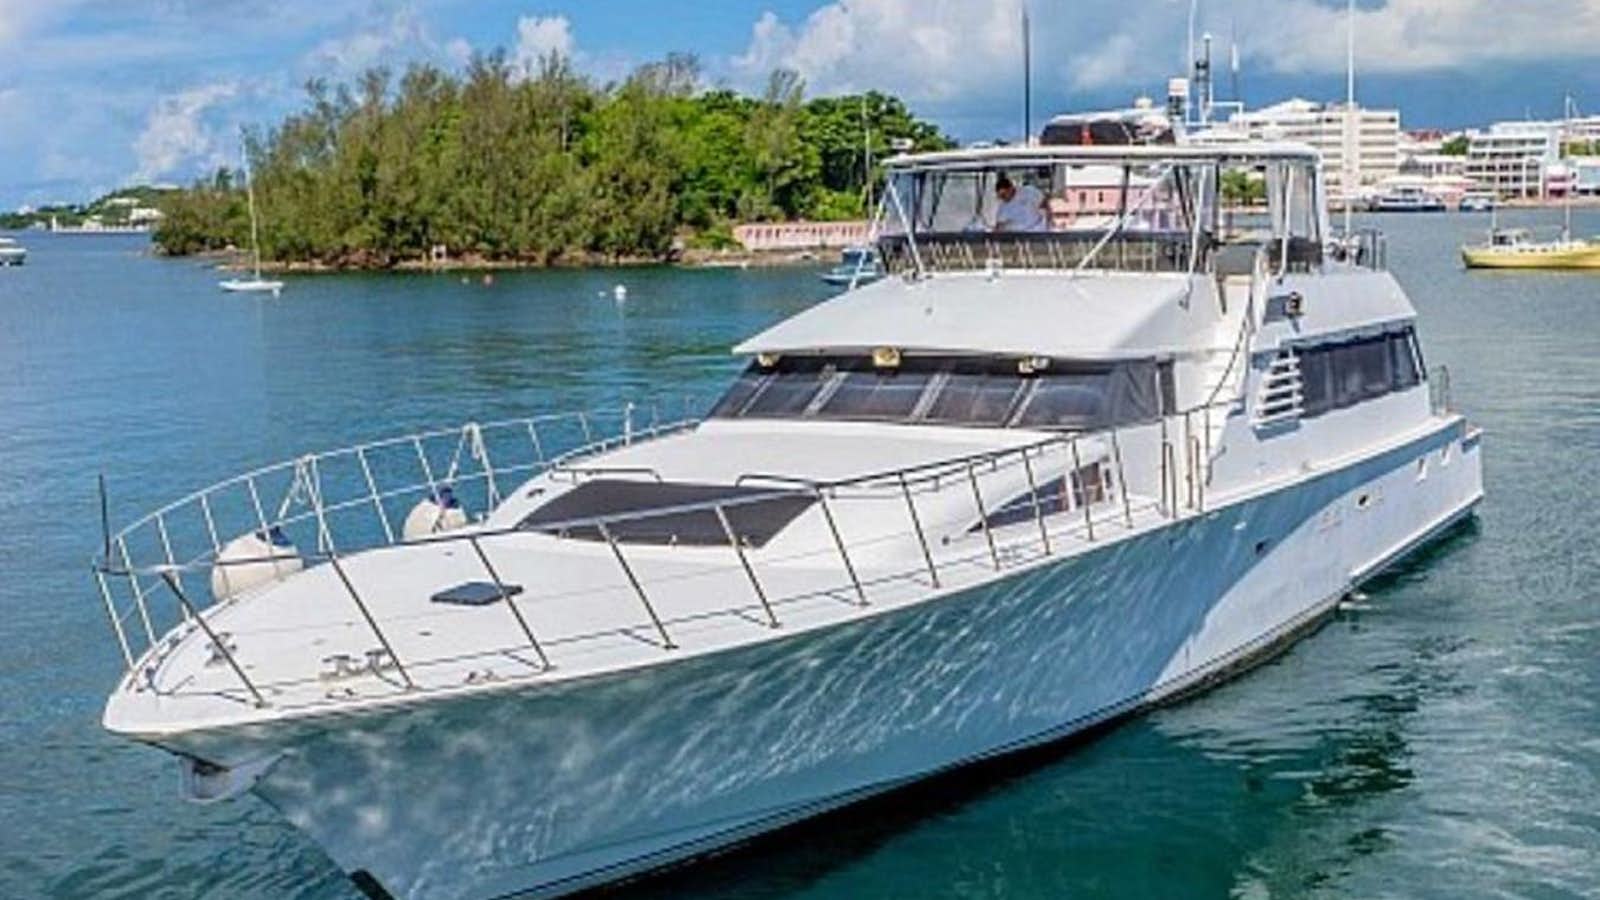 Lady charlotte
Yacht for Sale